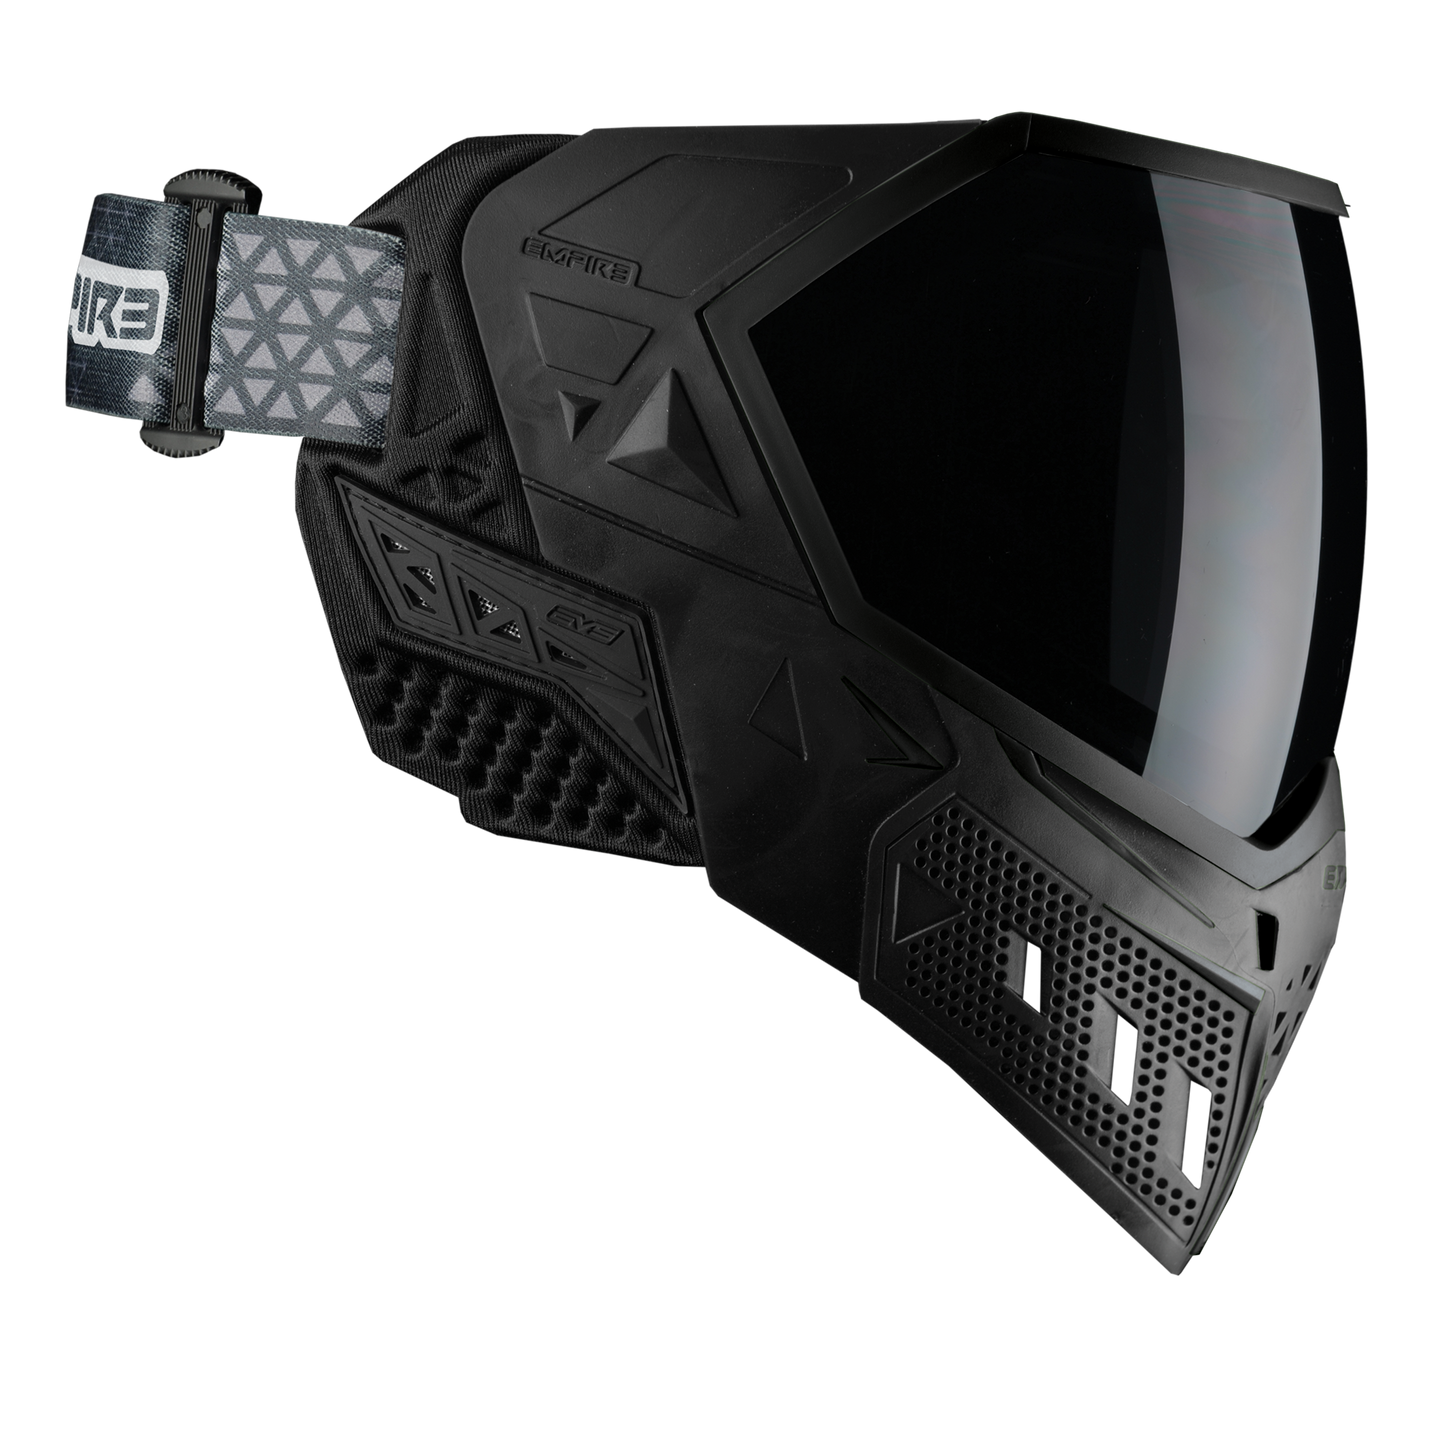 Empire EVS Goggle - Black/Black - with 2 lenses [Thermal Ninja & Thermal Clear]